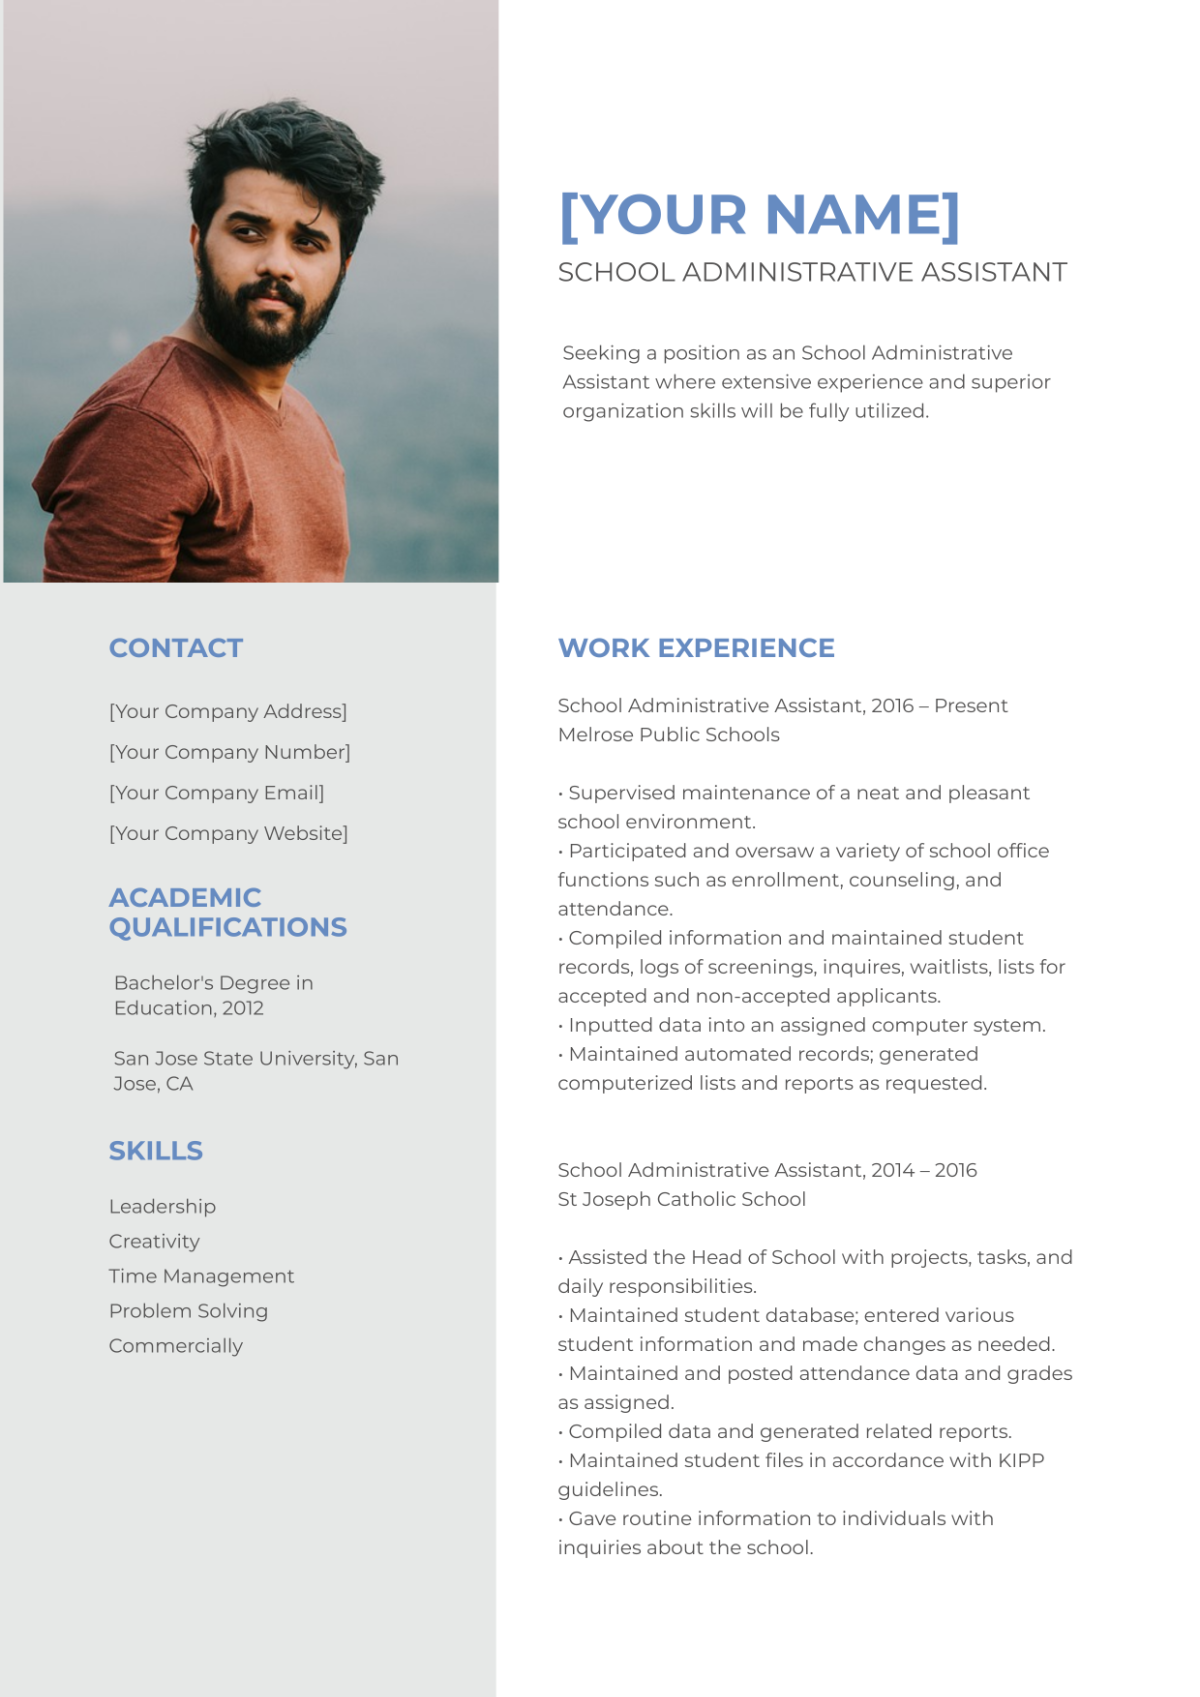 School Administrative Assistant Resume